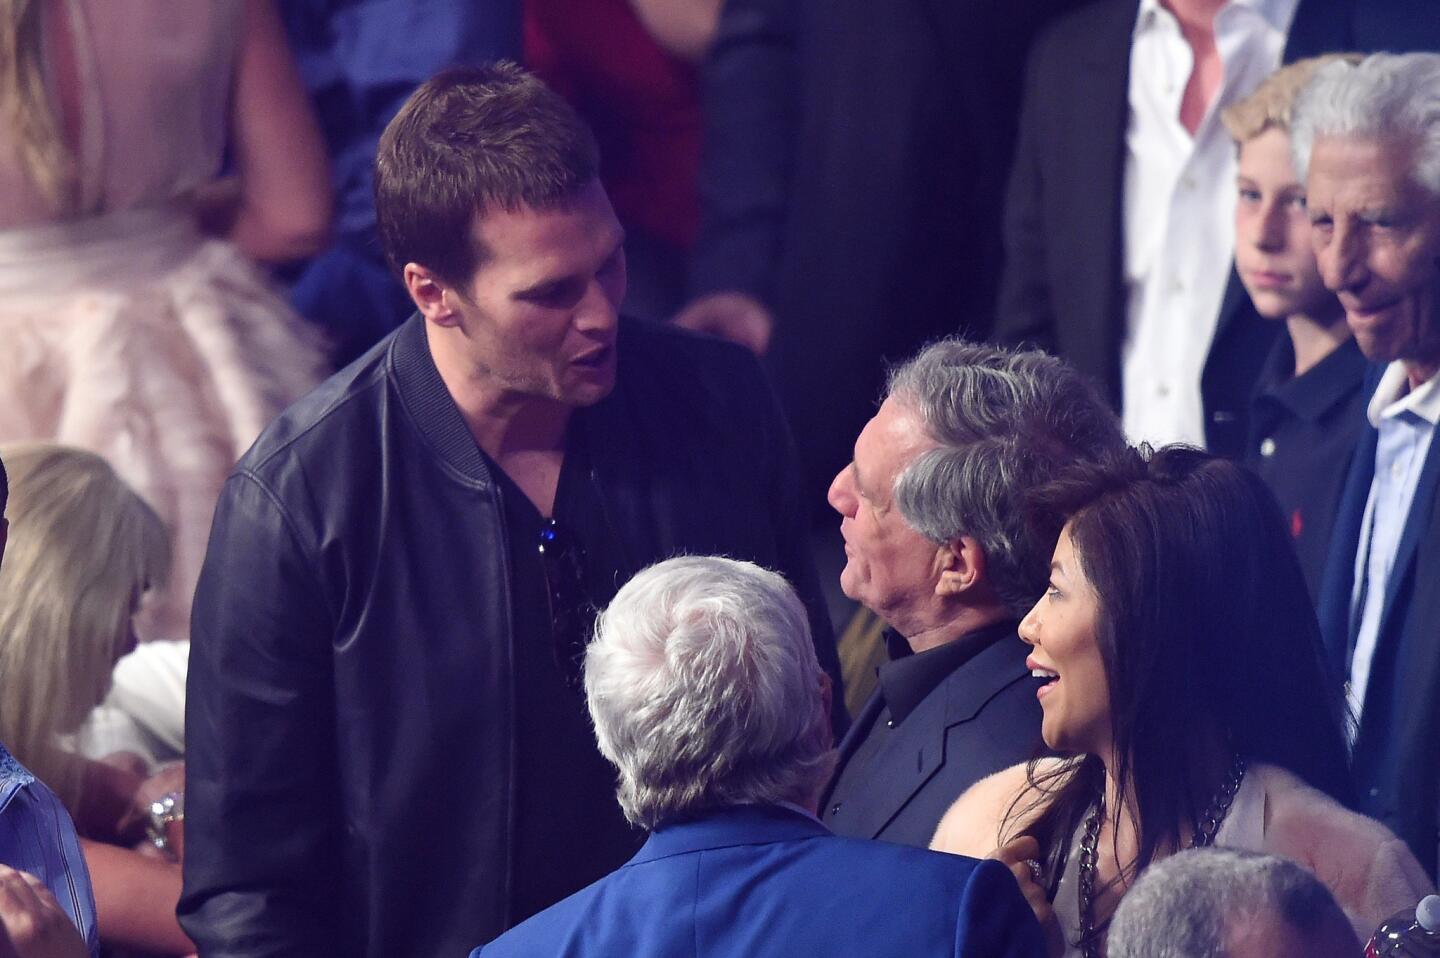 New England Patriots quarterback Tom Brady talks with Leslie Moonves and Julie Chen before the welterweight unification championship bout between Floyd Mayweather Jr. and Manny Pacquiao on Saturday night.